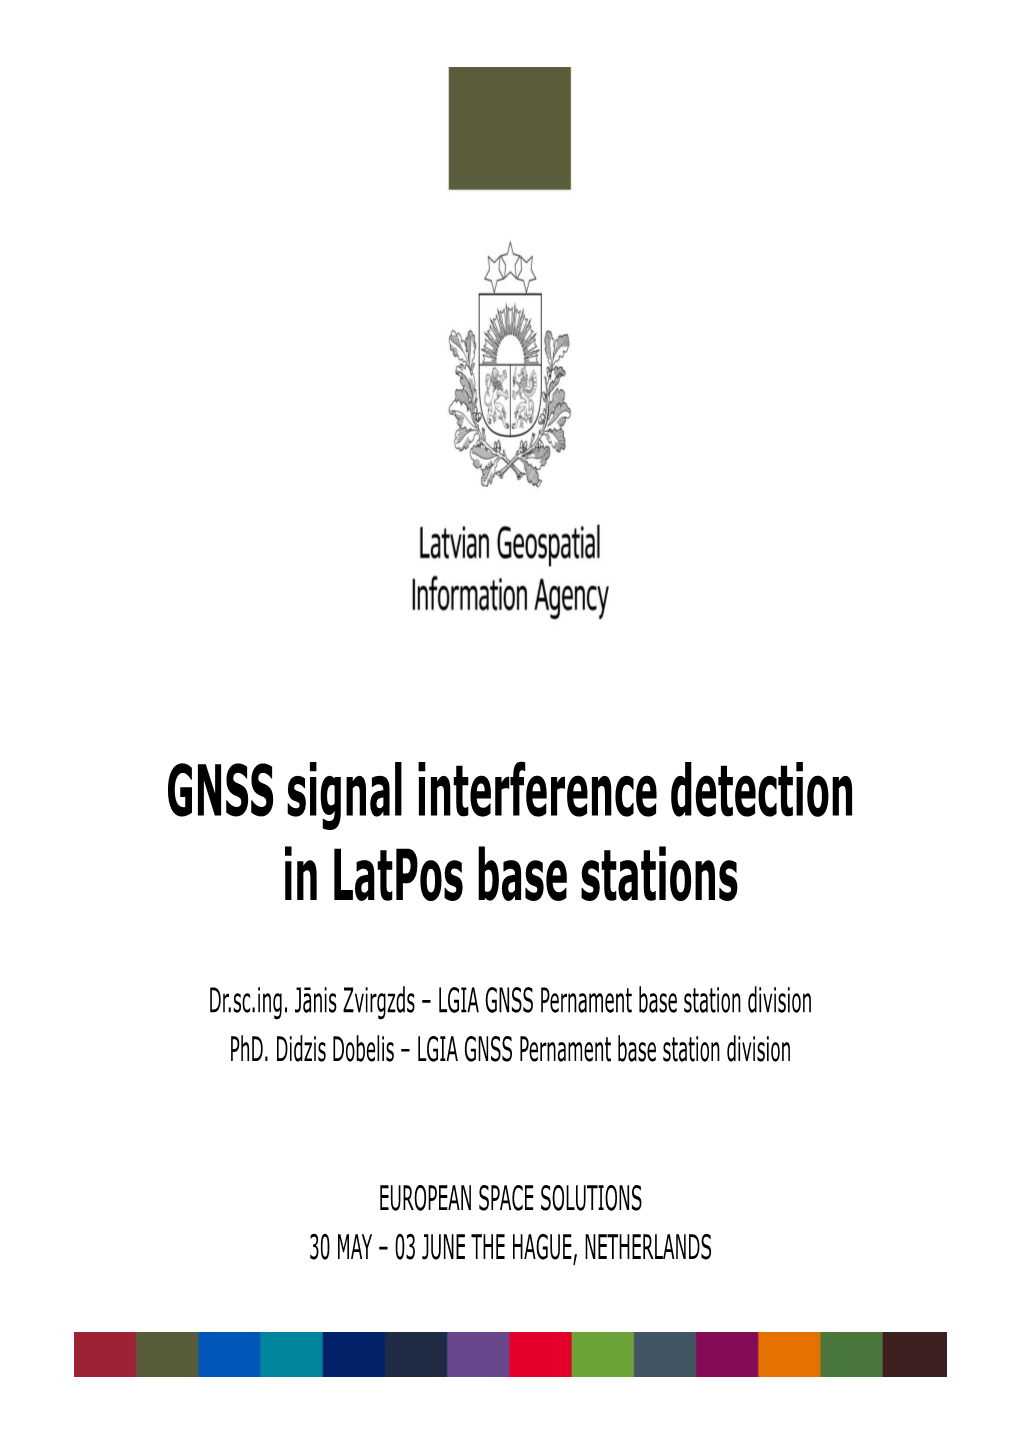 GNSS Signal Interference Detection in Latpos Base Stations